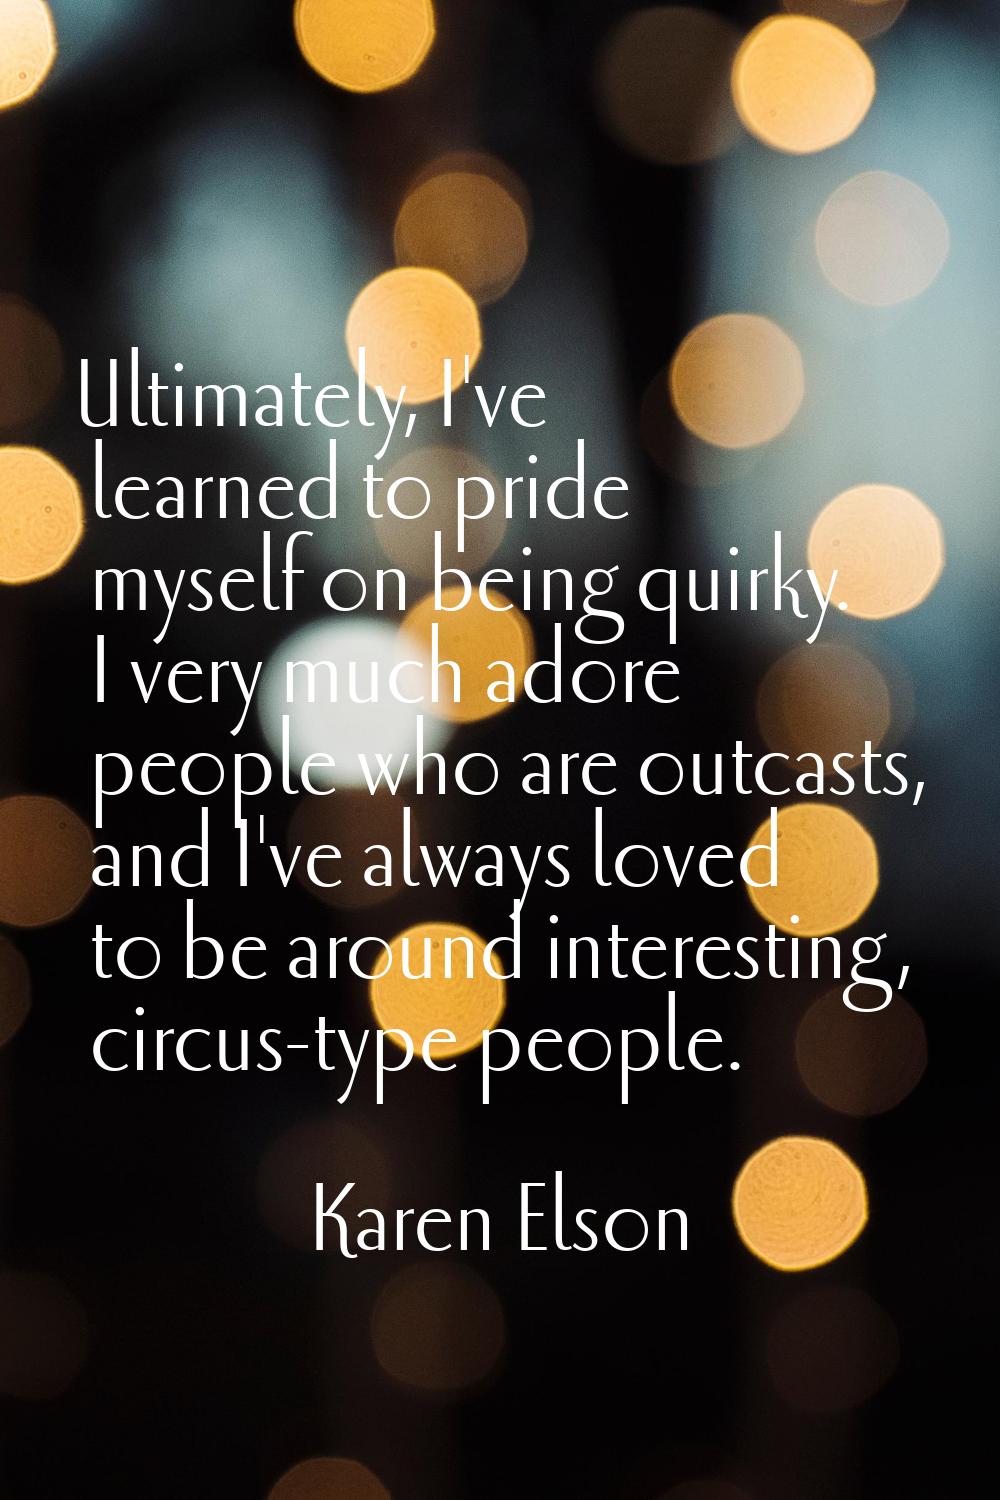 Ultimately, I've learned to pride myself on being quirky. I very much adore people who are outcasts